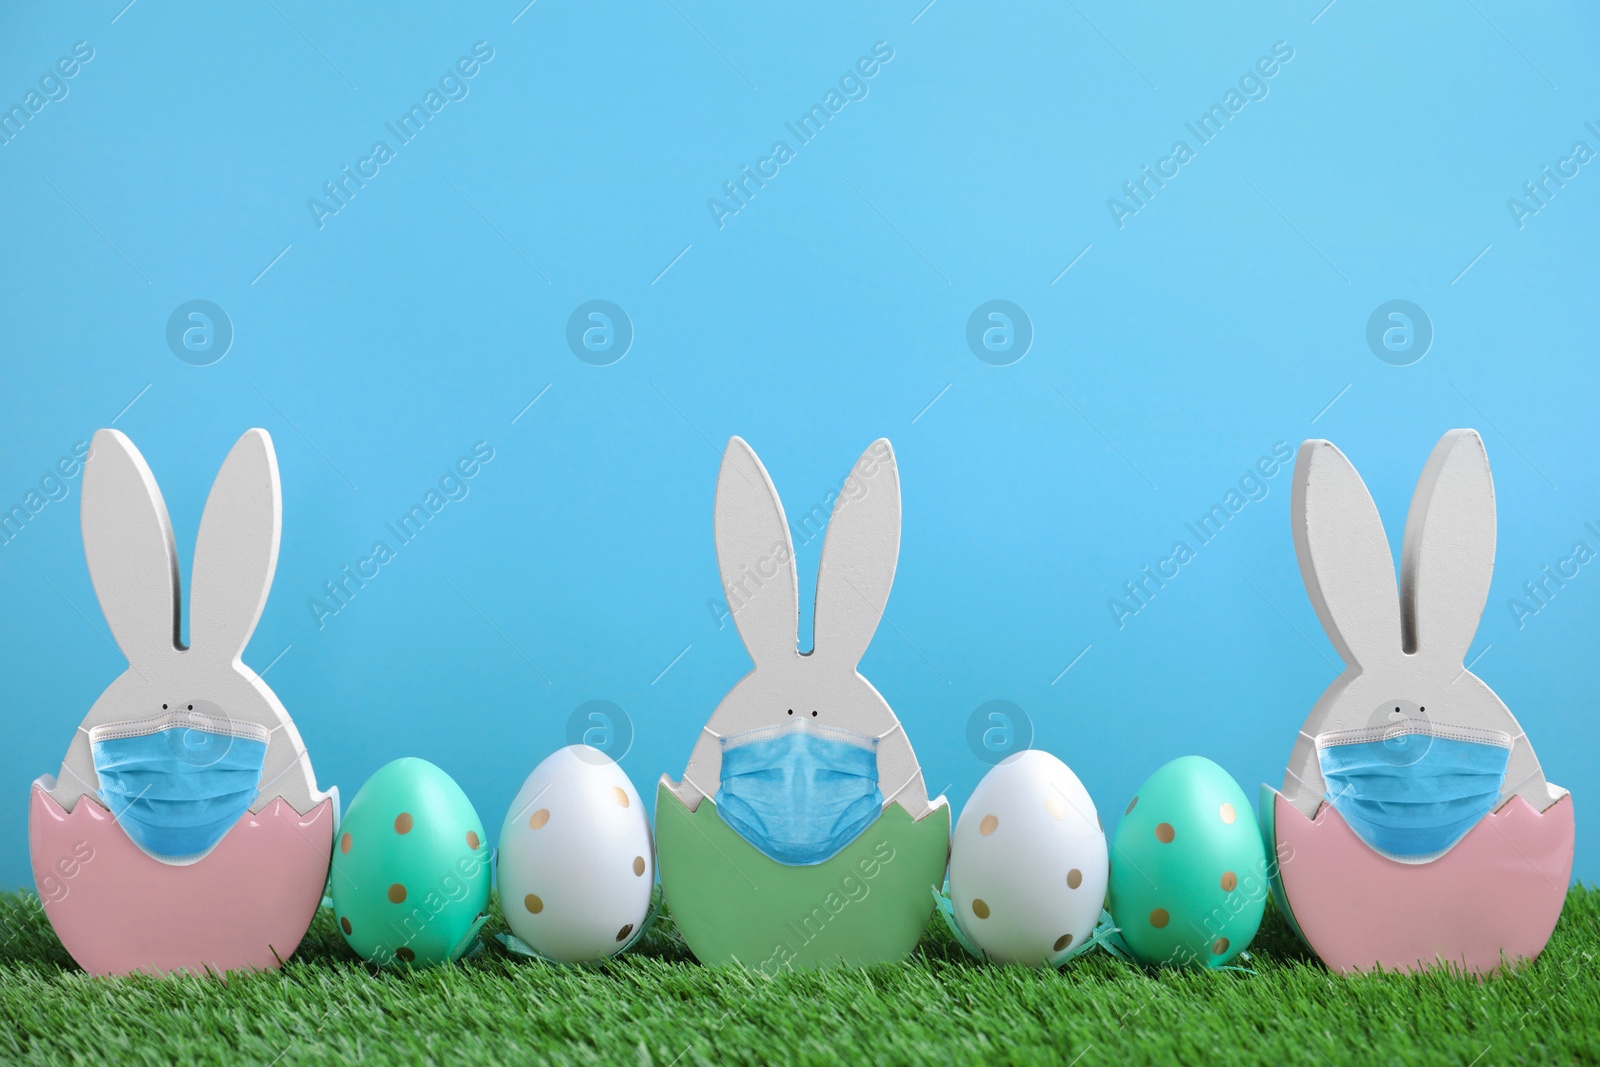 Image of COVID-19 pandemic. Easter bunny figures in protective masks and dyed eggs on green grass against light blue background